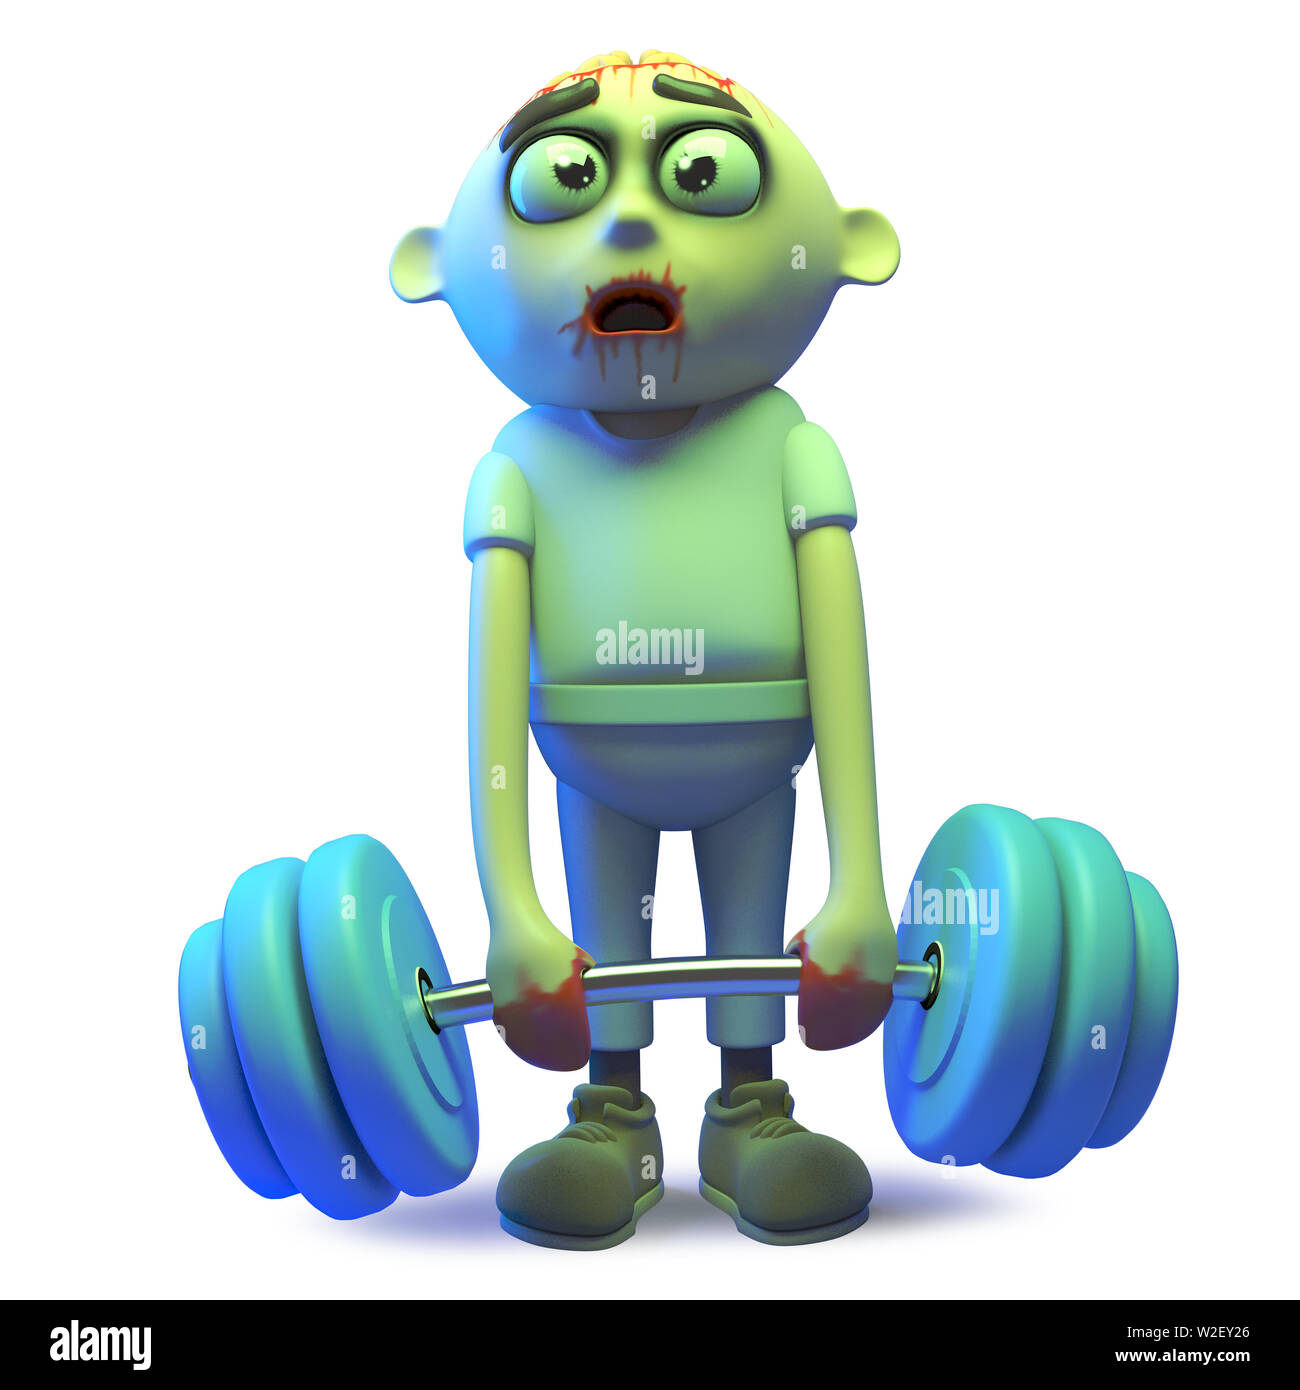 Rendered image of a stupid undead zombie monster getting in shape lifting weights, 3d illustration Stock Photo